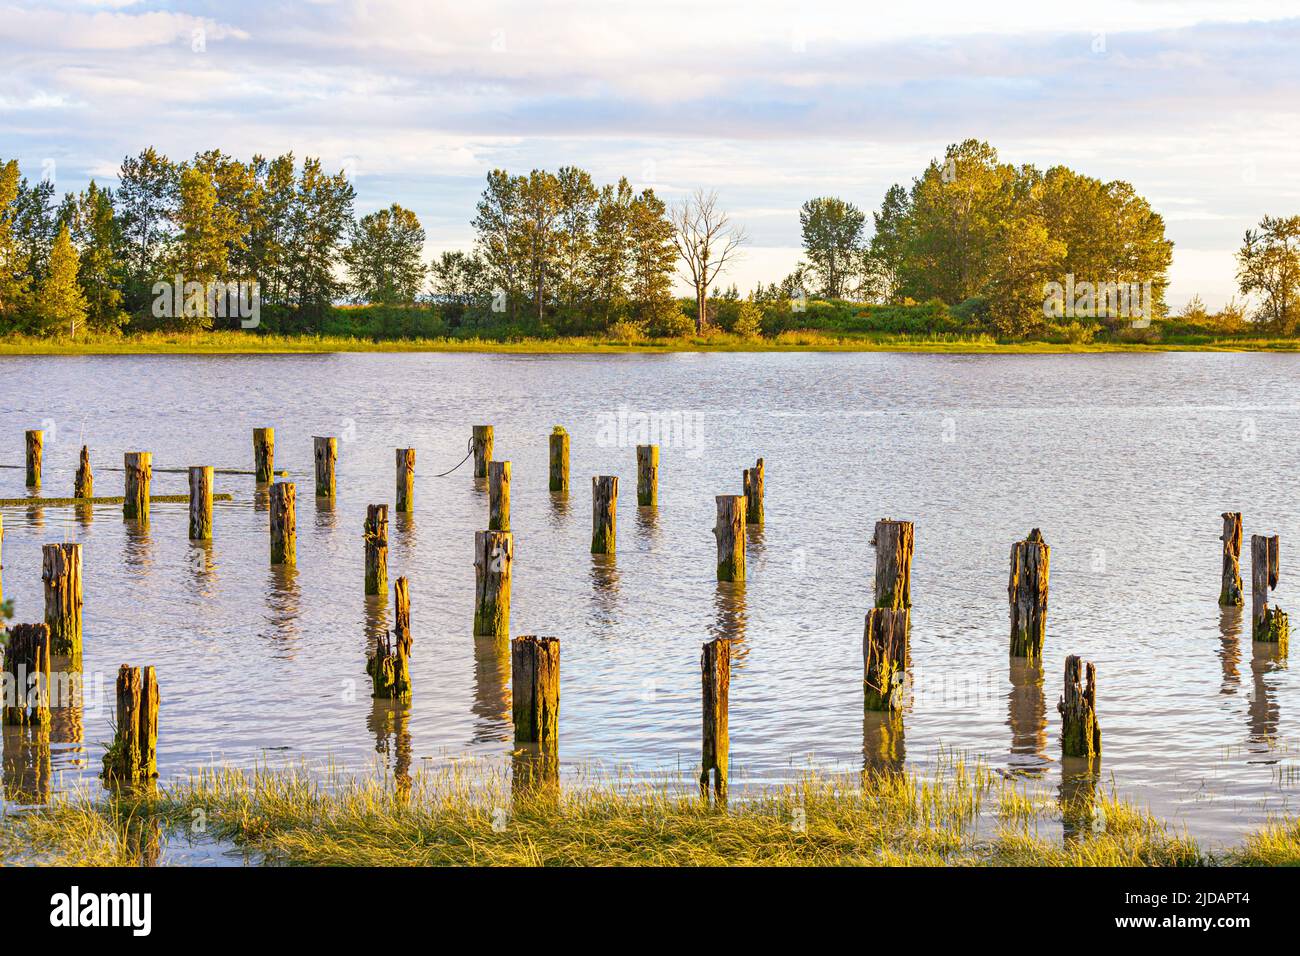 Decaying wooden pilings in the Steveston Channel at sunset in British Columbia Canada Stock Photo